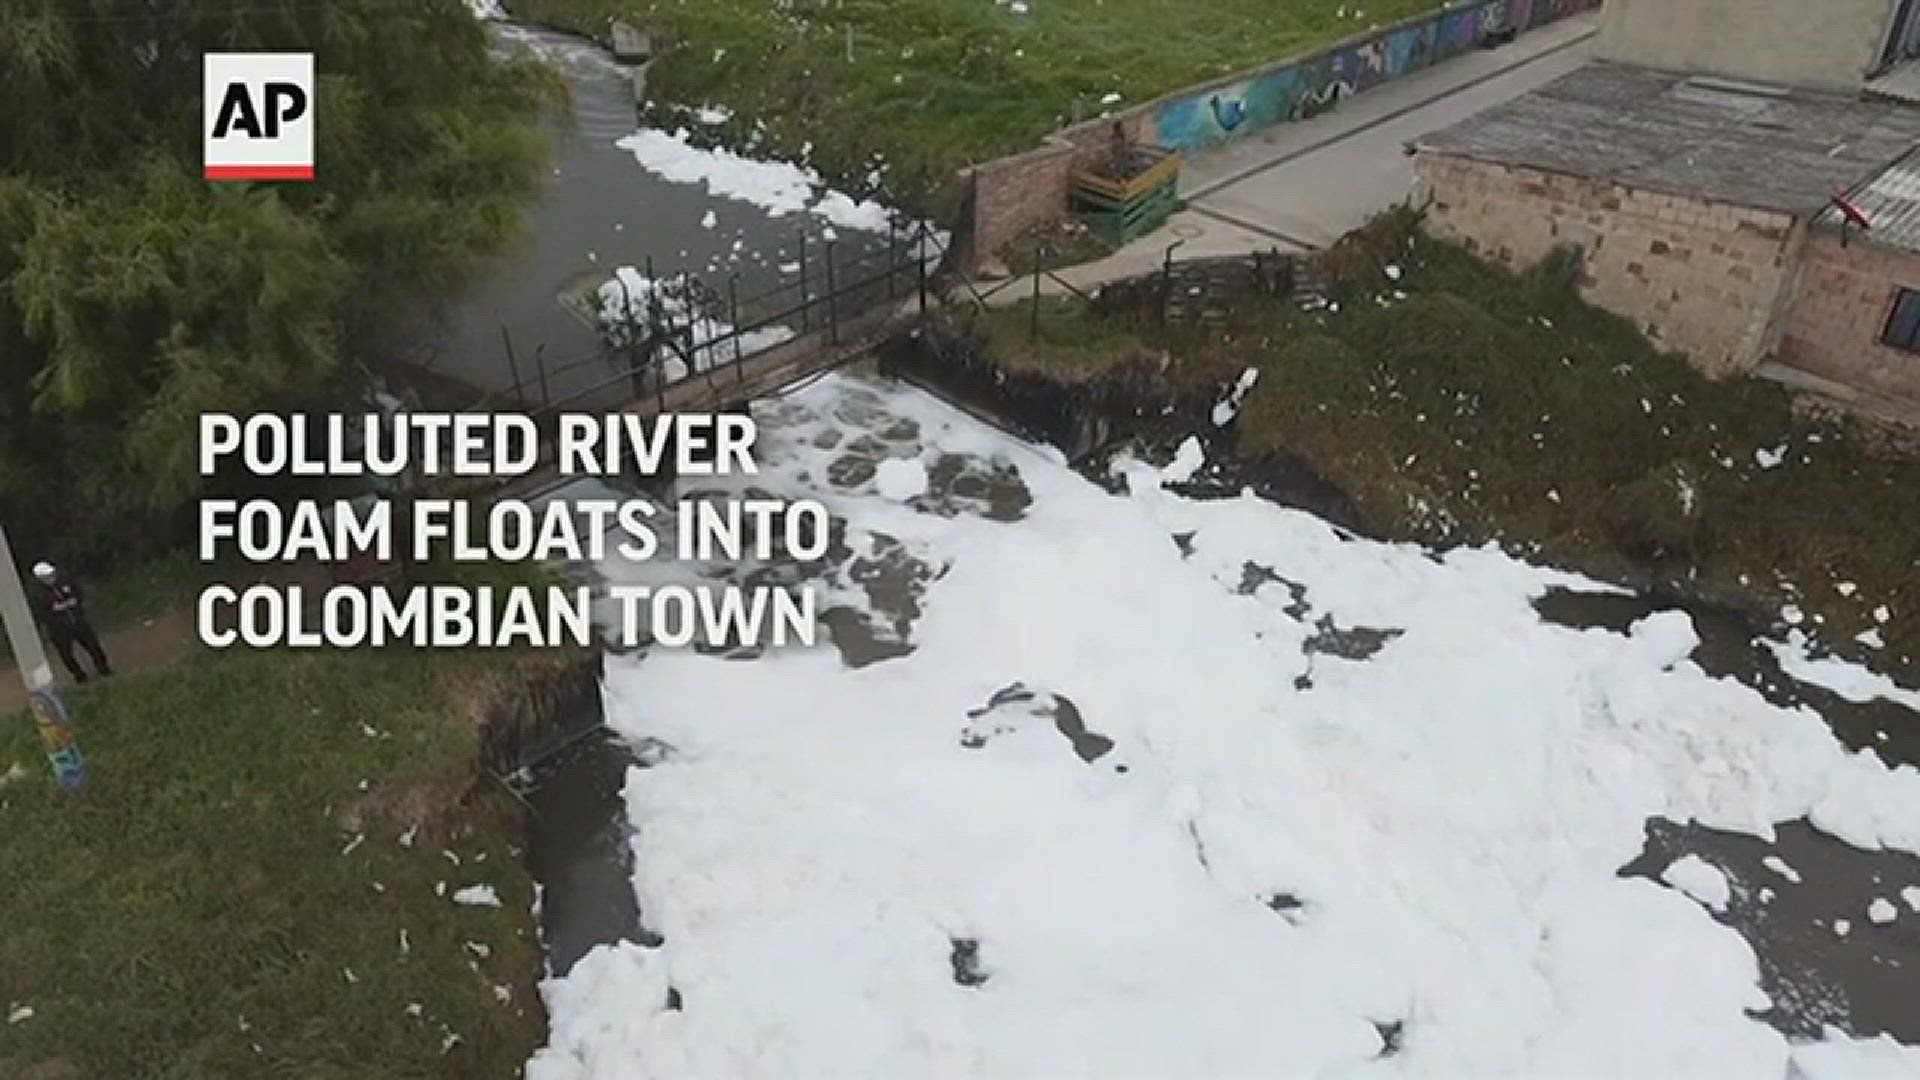 An immense layer of foam coming out from a polluted river has reached the homes of the locals of Mosquera, on the outskirts of the Colombian capital Bogota.